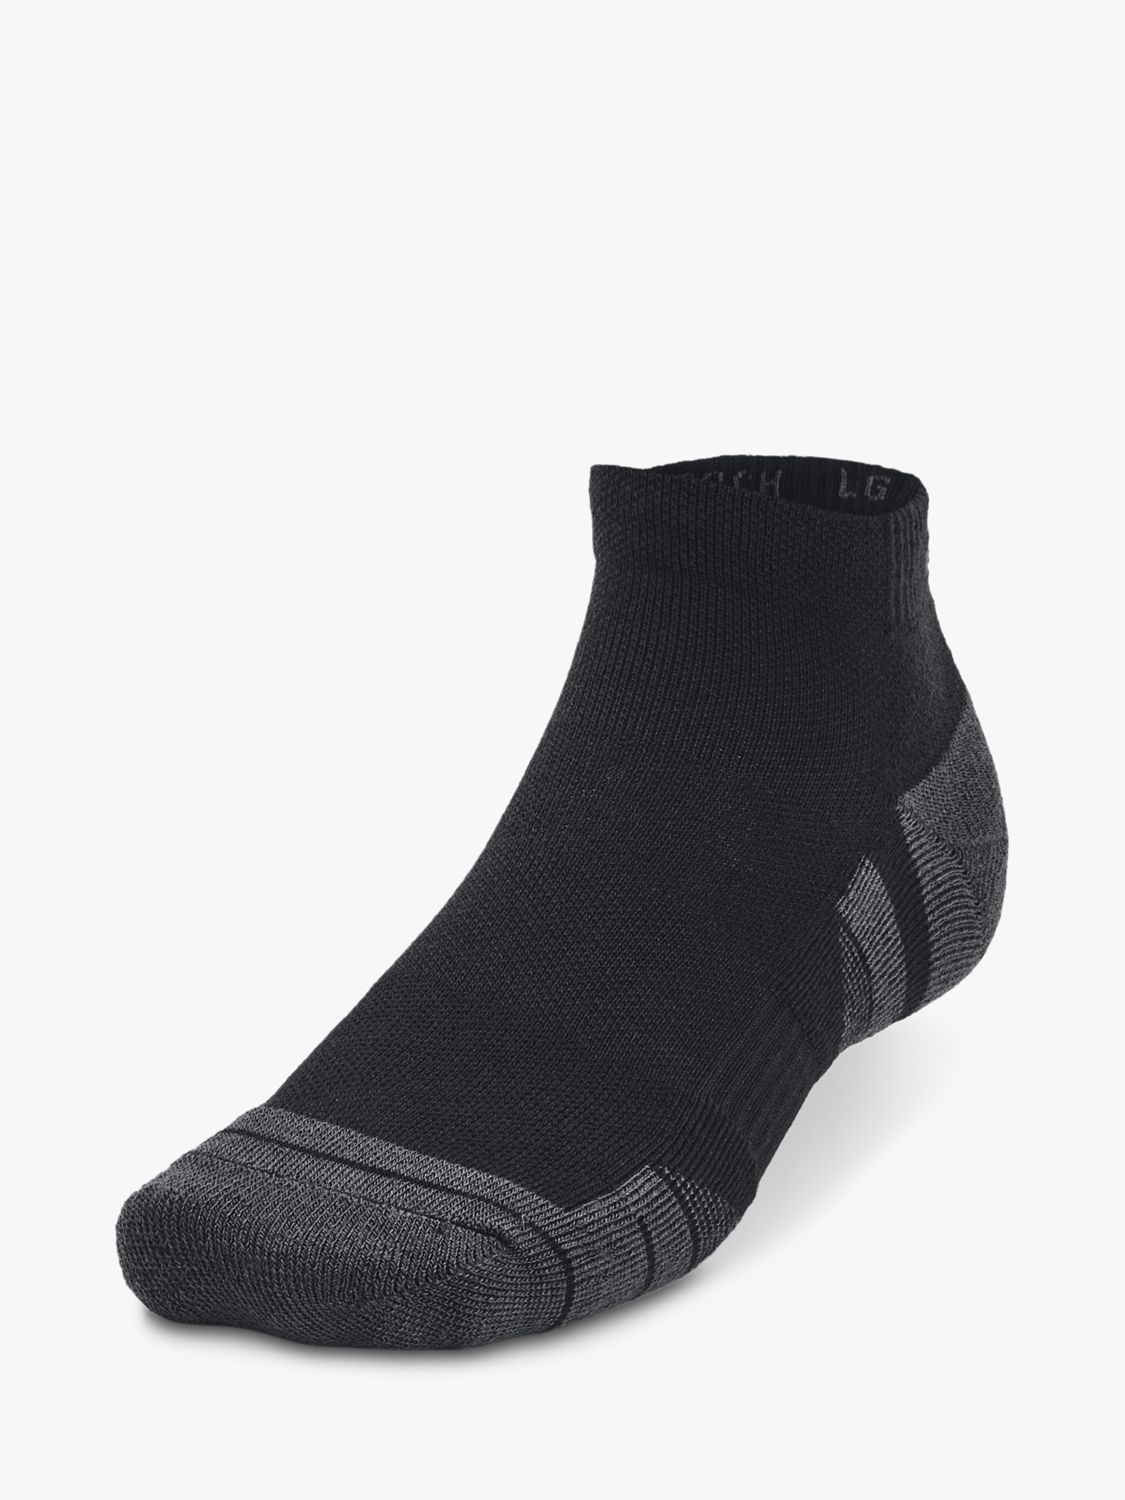 Under Armour Performance Tech Low Cut Socks, Pack of 3, Black/Jet Gray ...